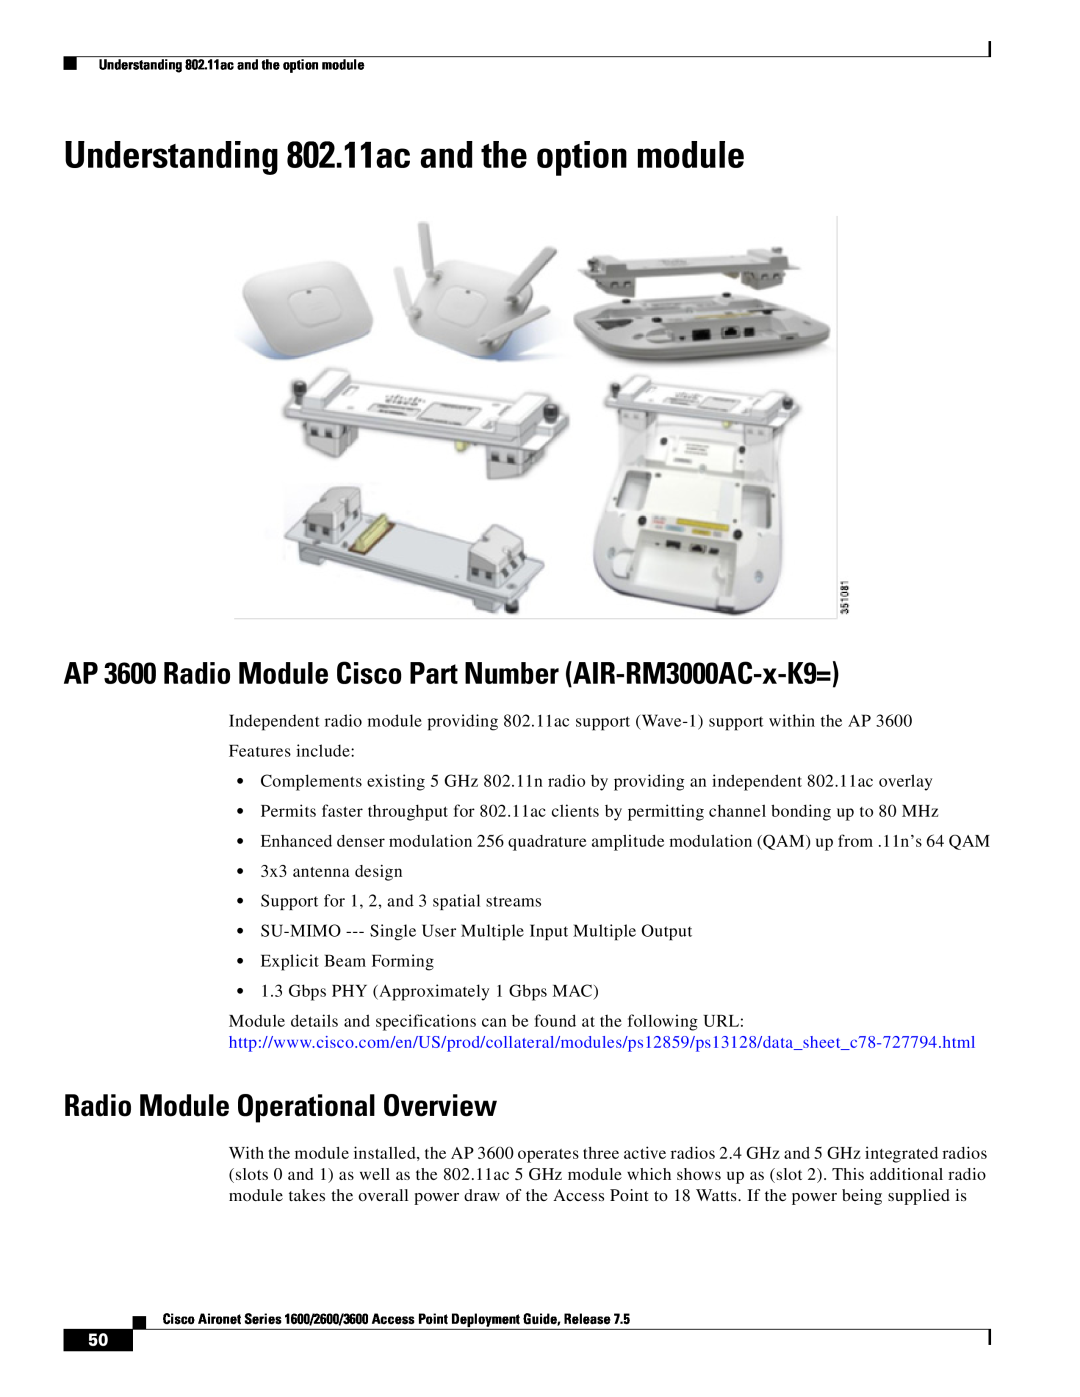 Cisco Systems AIRRM3000ACAK9 manual Understanding 802.11ac and the option module, Radio Module Operational Overview 